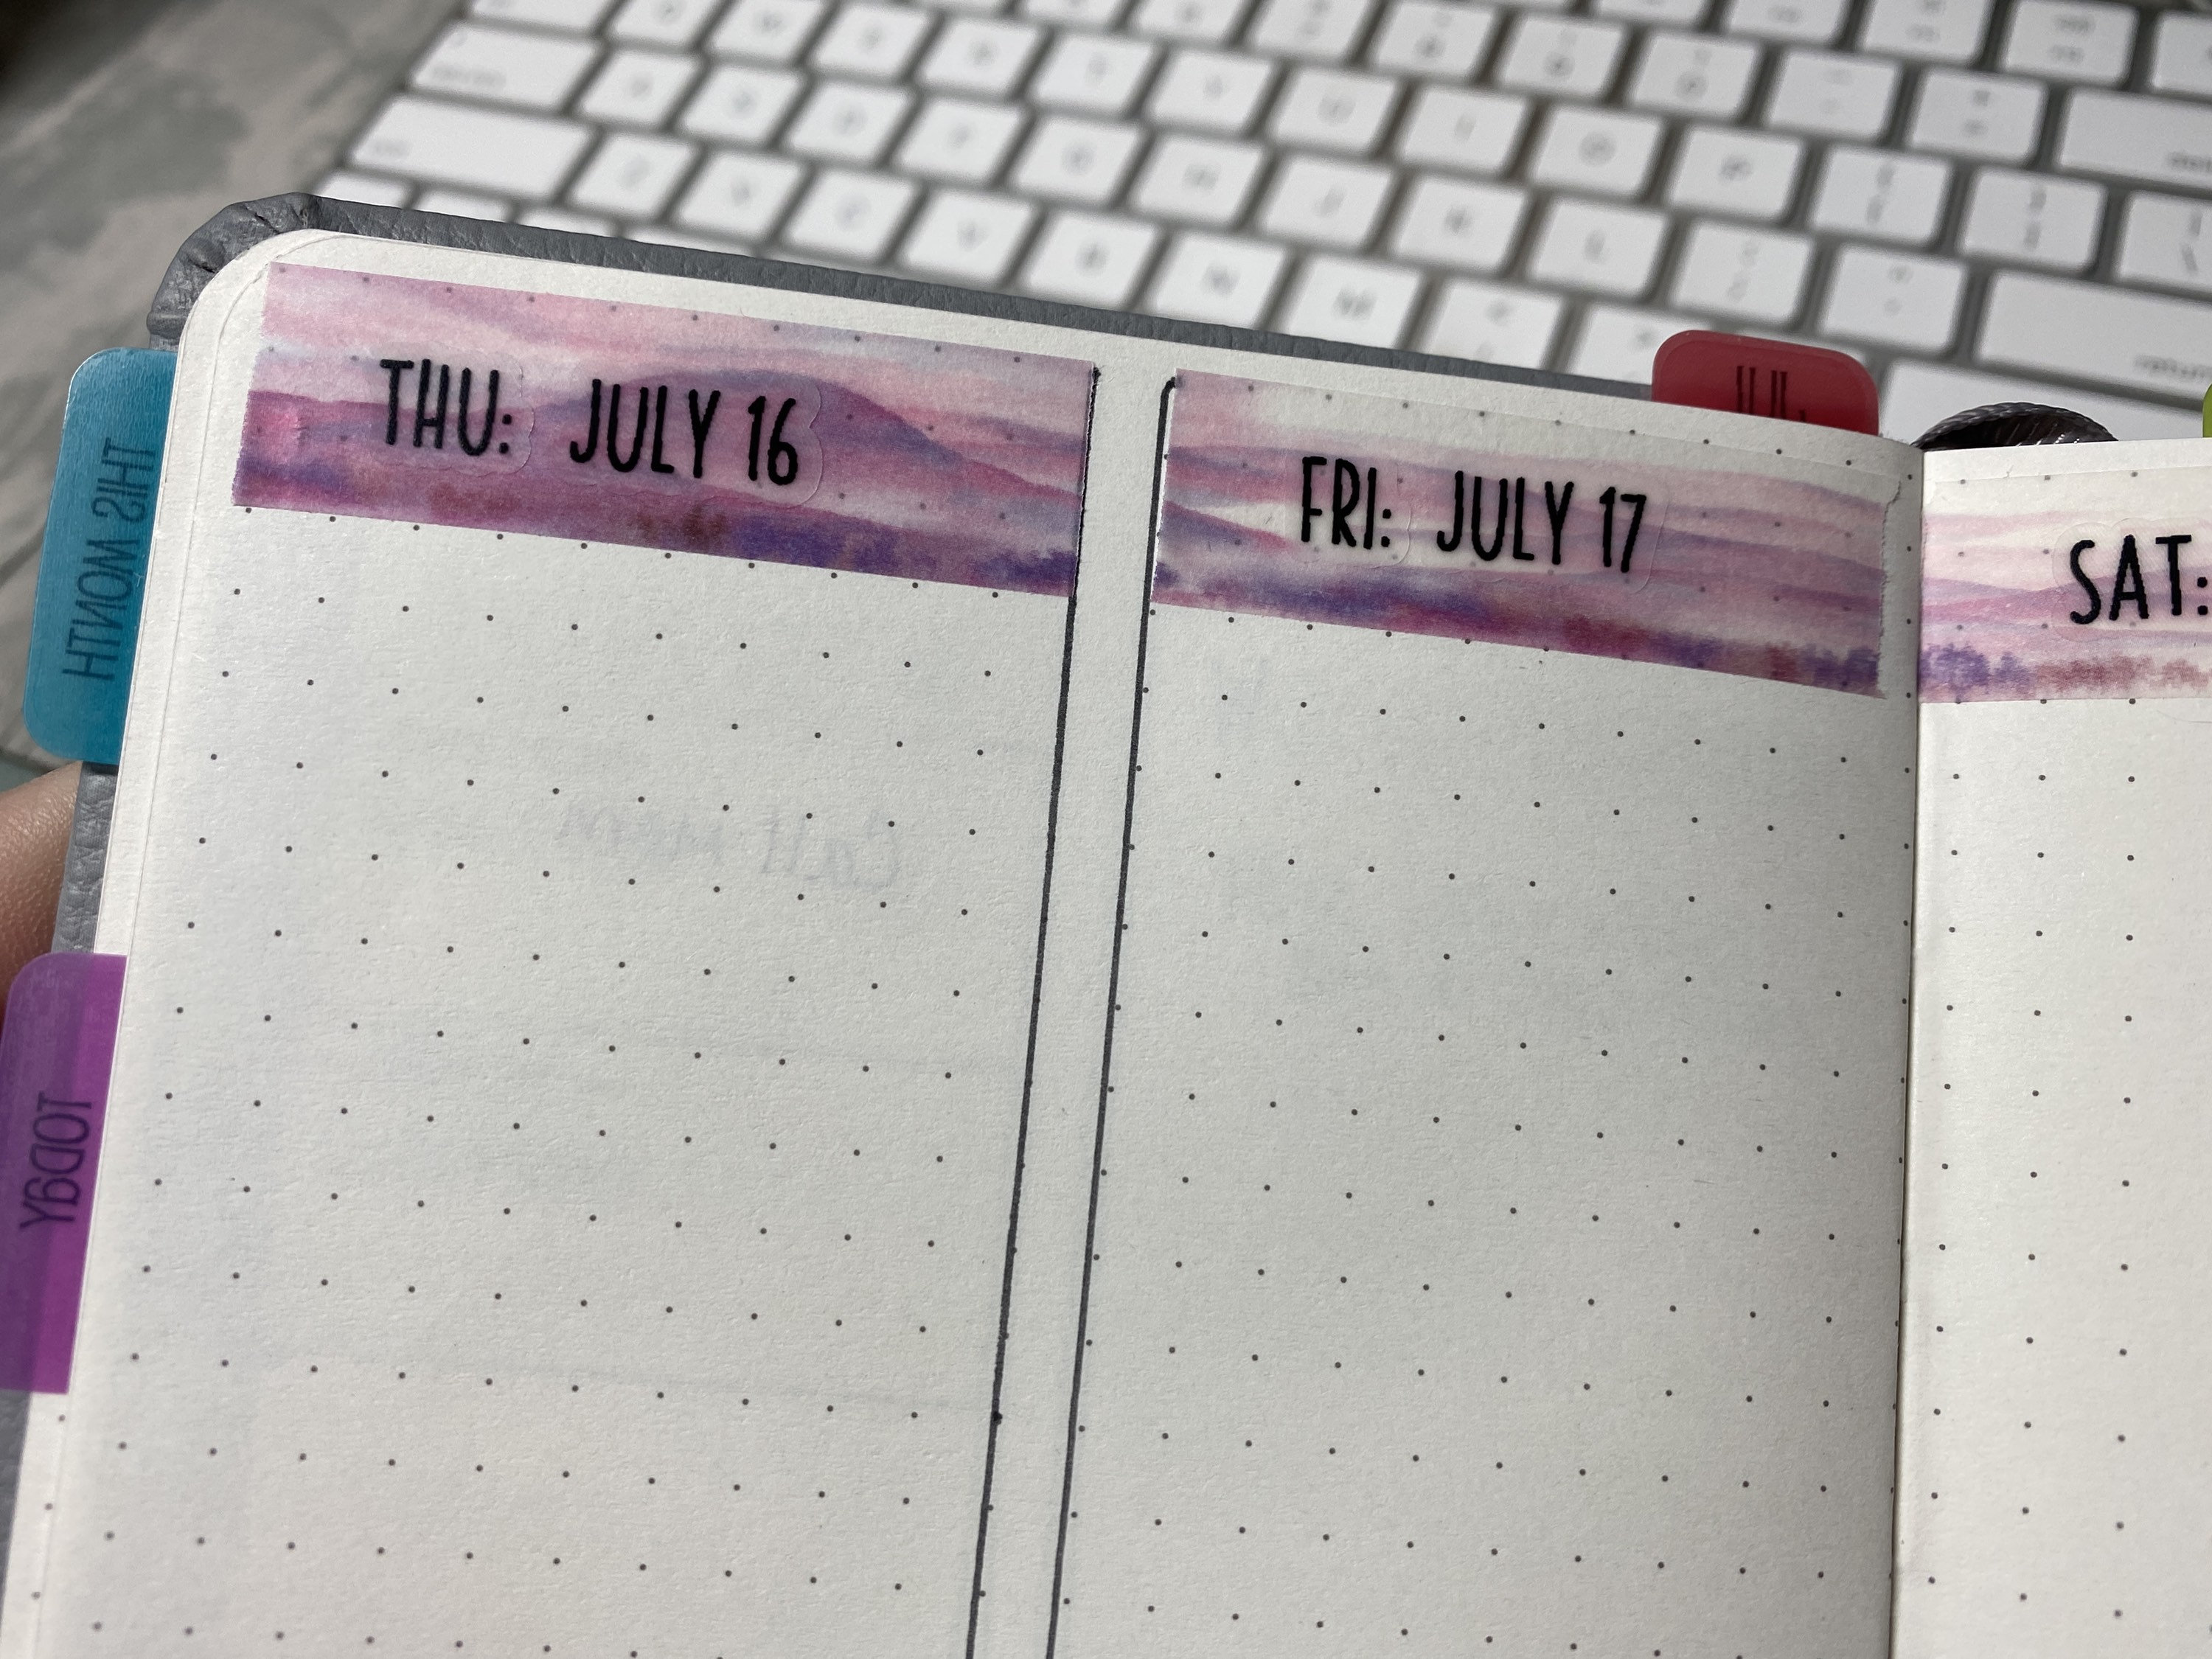 Extra days of the week stickers with birth control pack! : r/planners